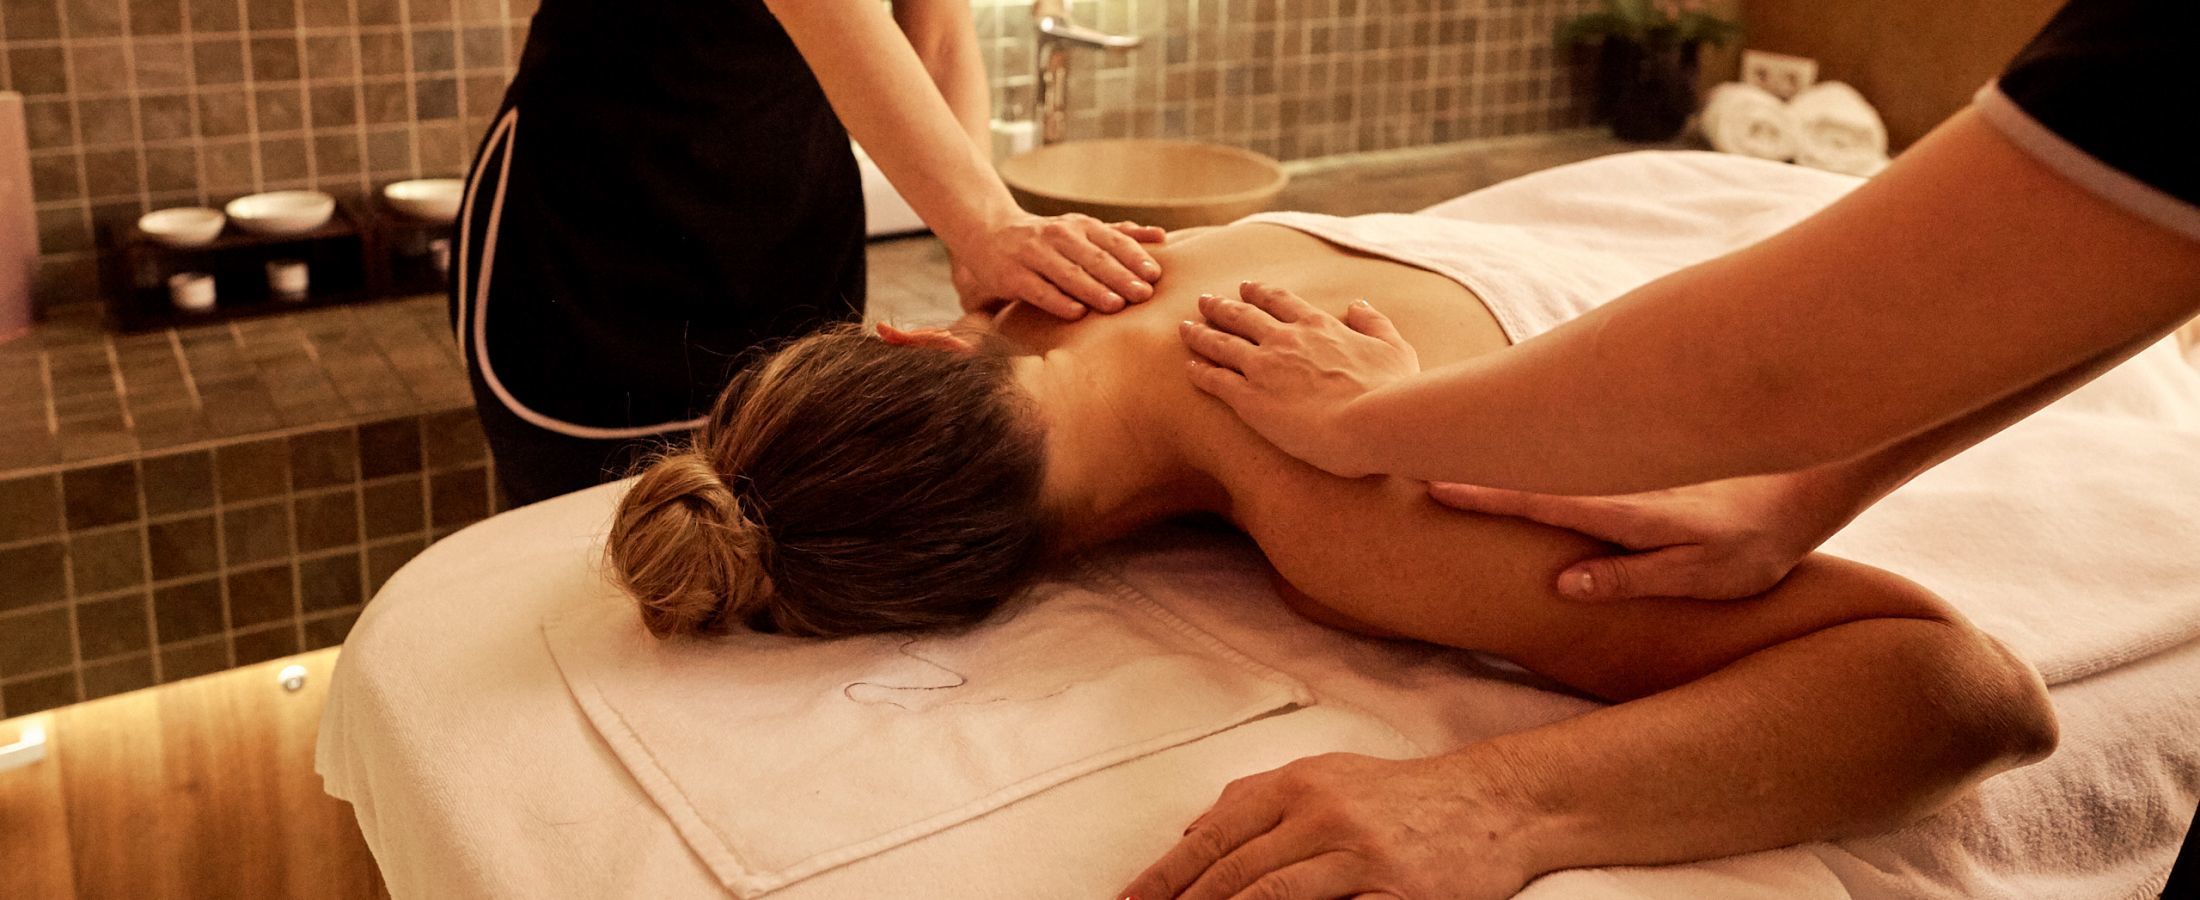 A woman getting a massage by 2 massage therapists, a 4 handed treatment